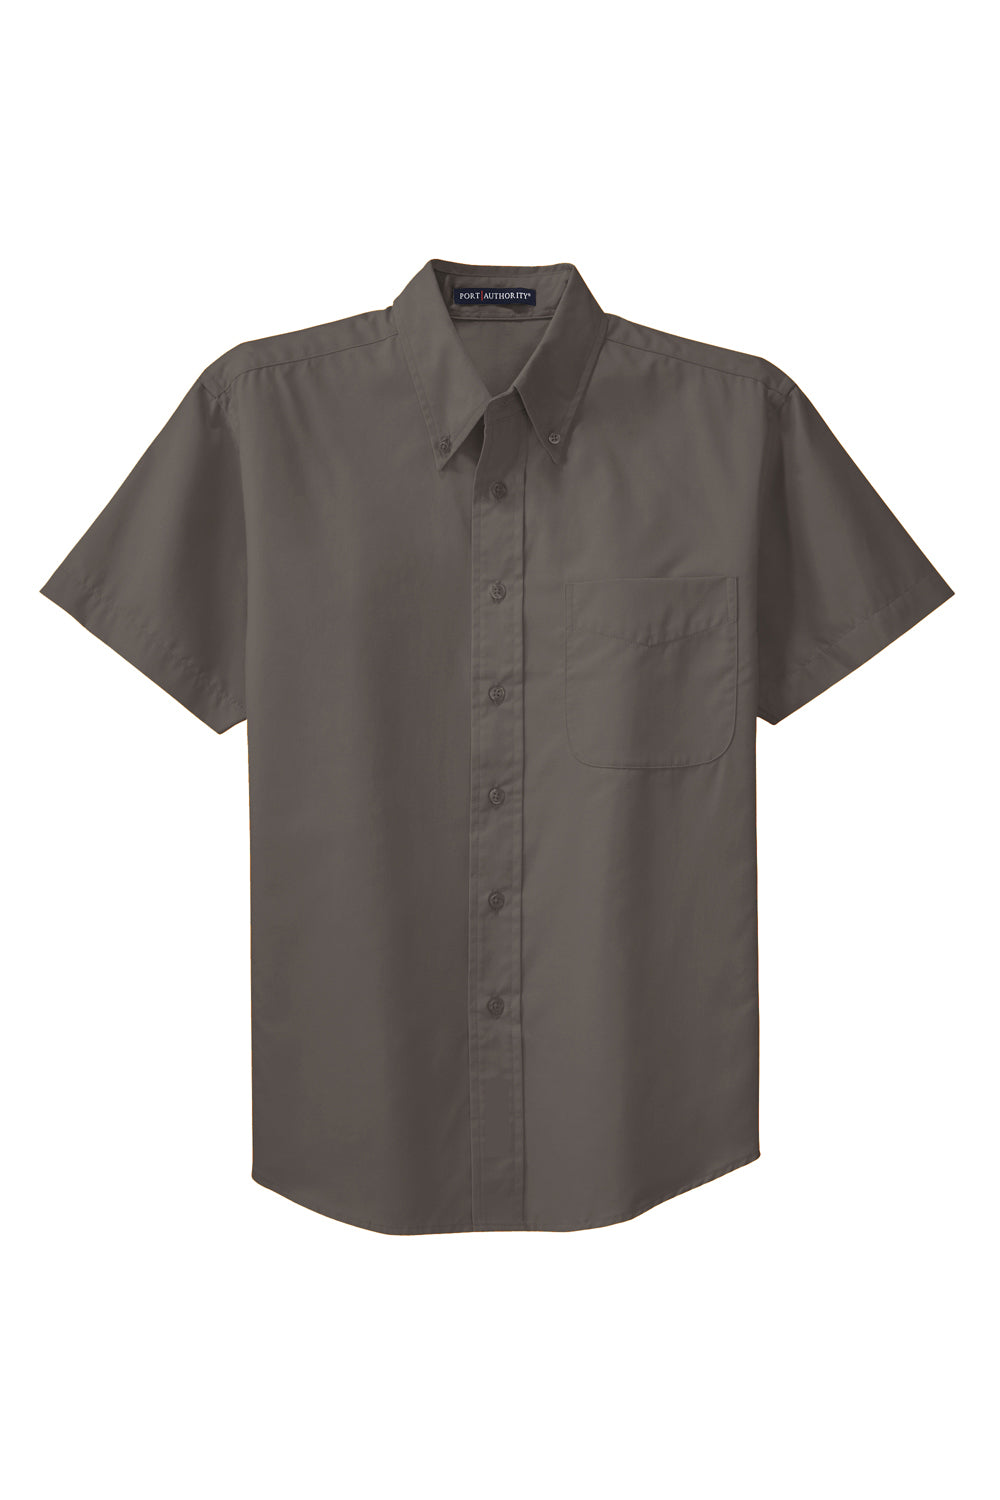 Port Authority S508/TLS508 Mens Easy Care Wrinkle Resistant Short Sleeve Button Down Shirt w/ Pocket Bark Brown Flat Front